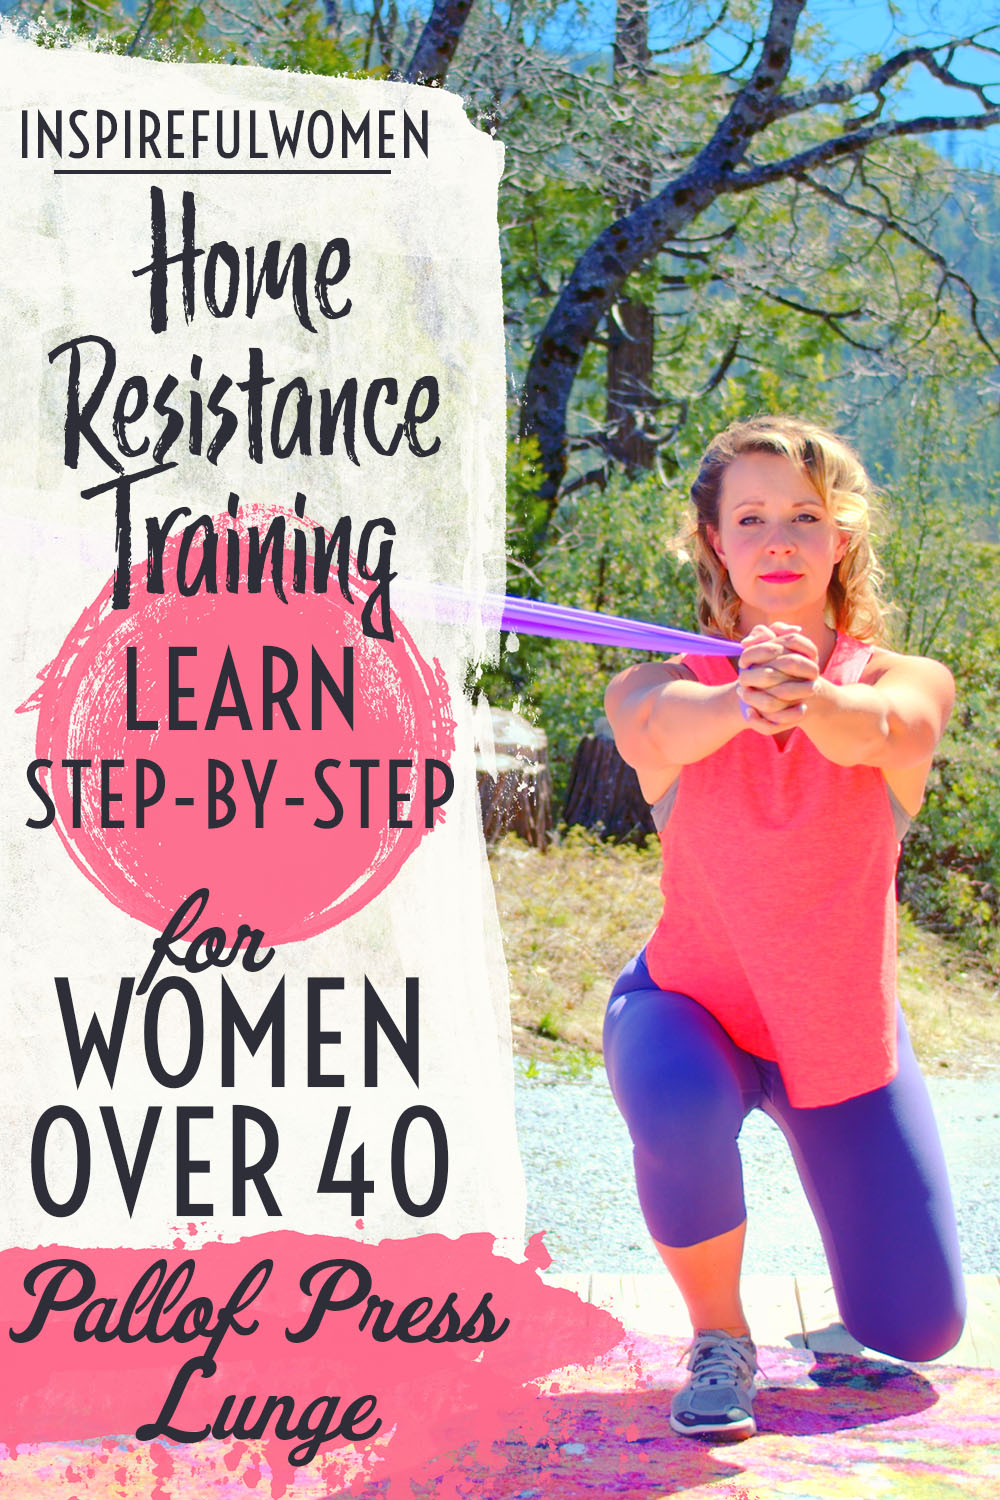 pallof-press-lunge-anti-rotation-core-exercise-at-home-women-over-40